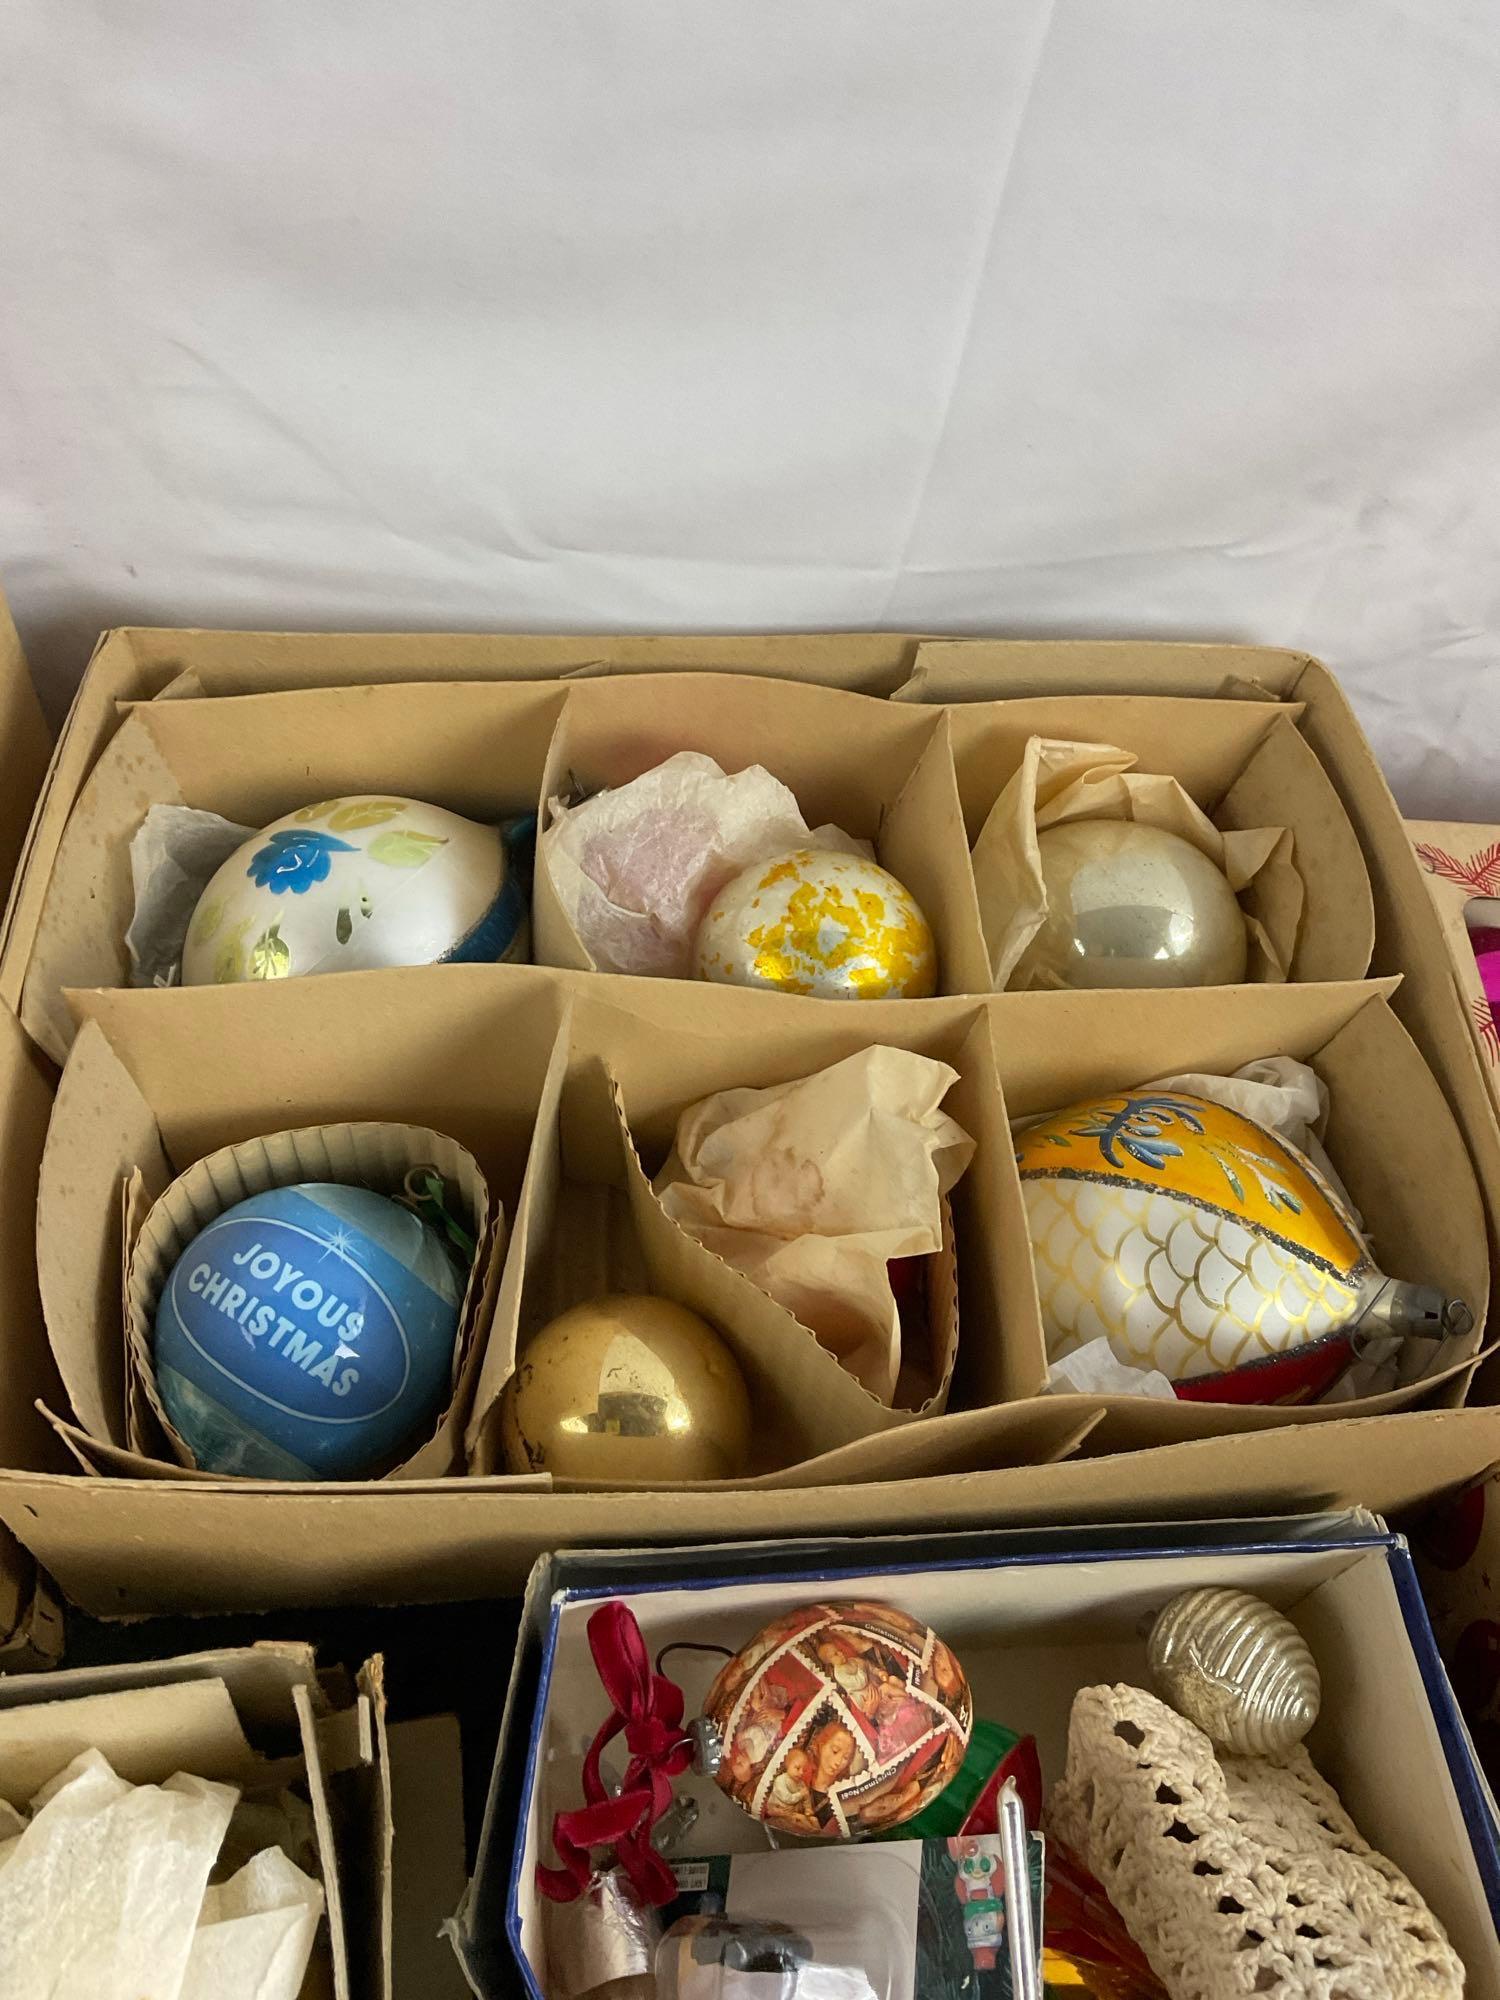 Large Assortment of Vintage Christmas Ornaments of Various Shapes, Sizes, & Styles